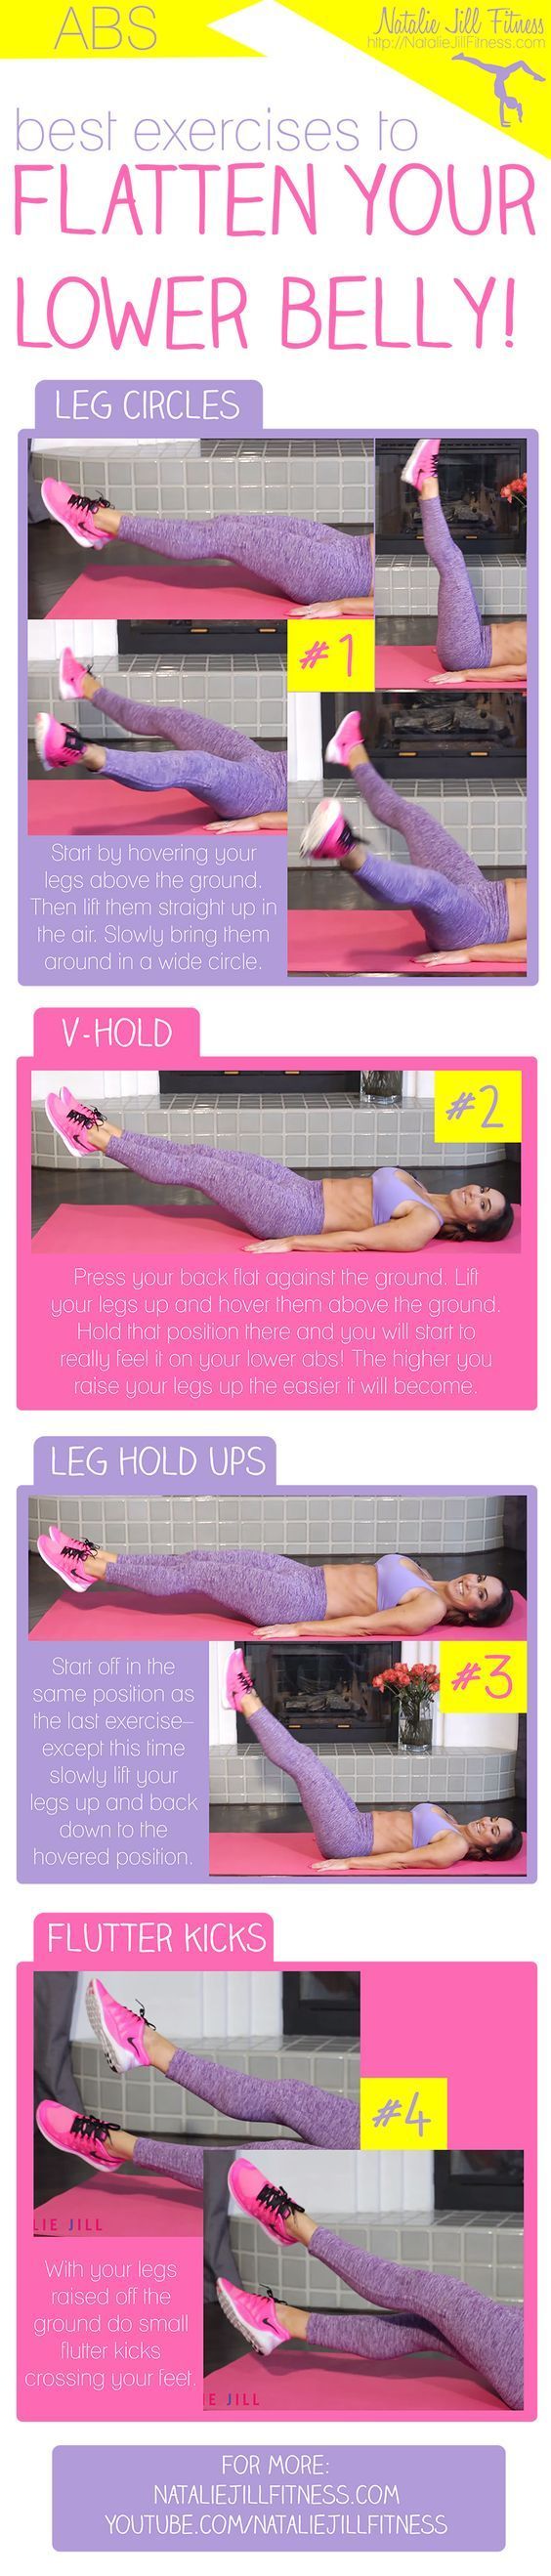 Belly Pooch Be GONE!!!! Here Are The BEST Exercises To Flatten Your Lower Belly!!!